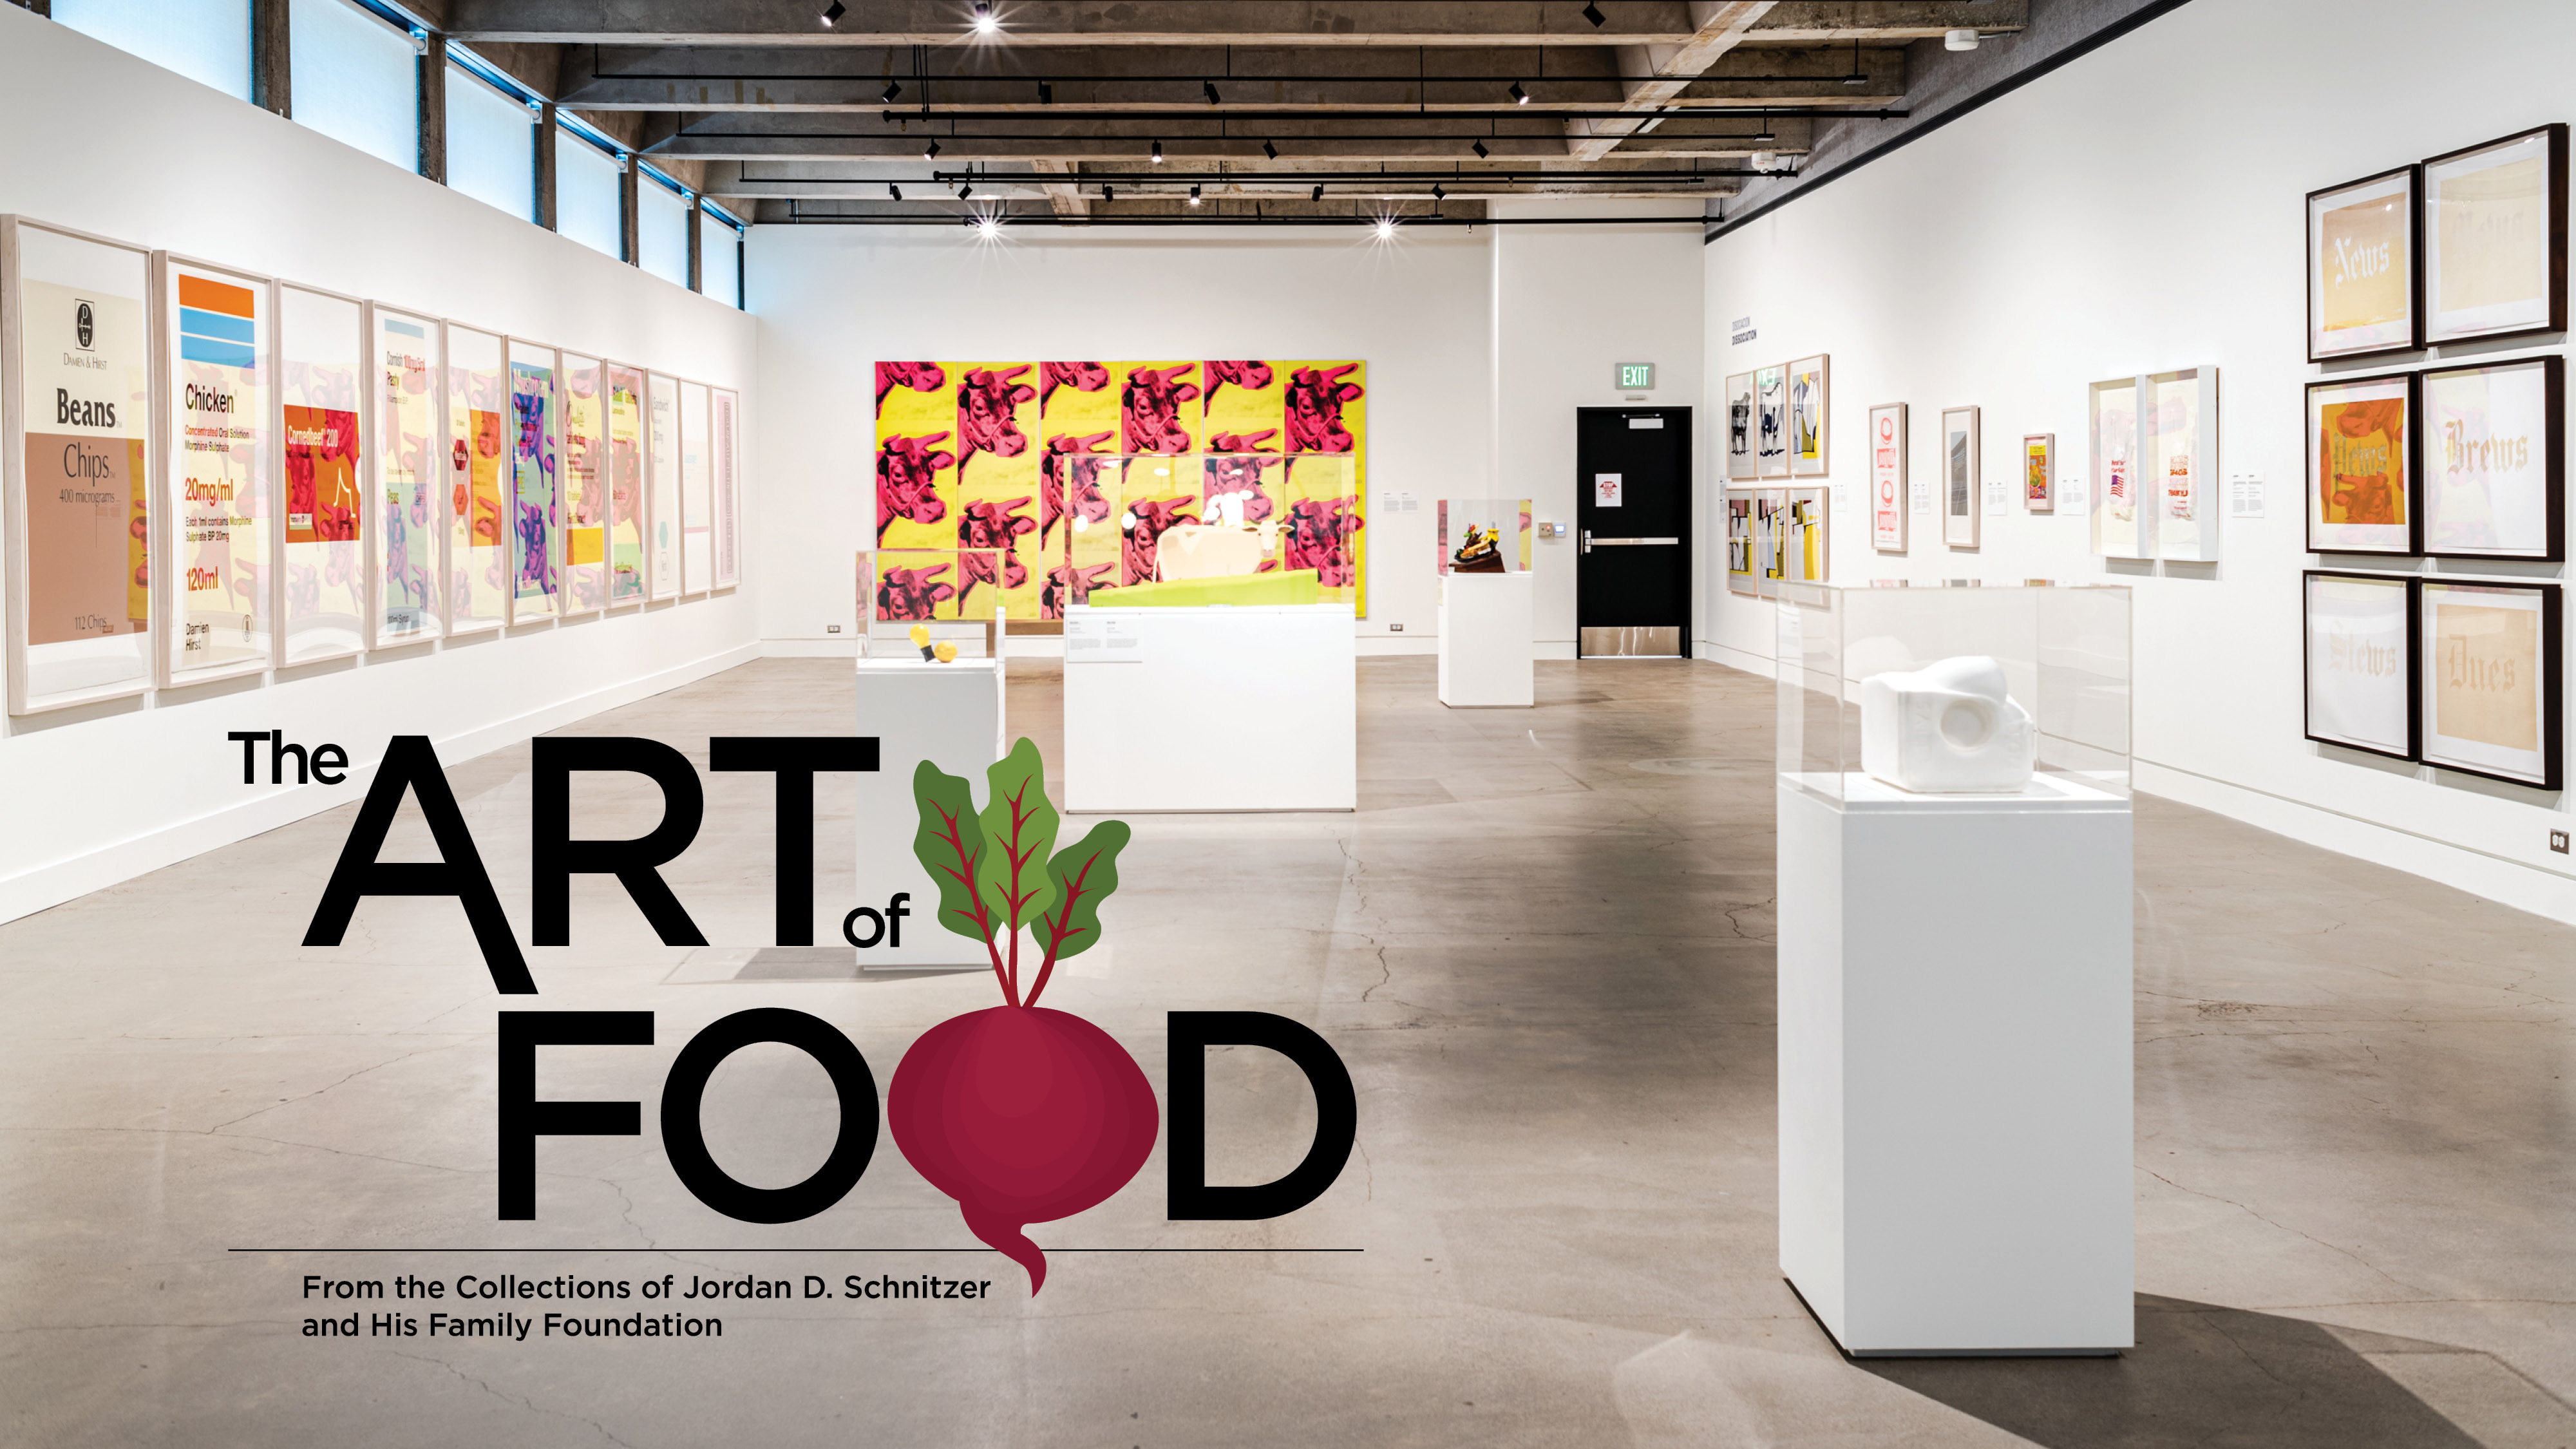 Works of art in a gallery including a series of prints depicting foods as prescription labels, a print of pink cows on a yellow background and a salt sculpture on a plinth. A logo reads "The Art of Food."